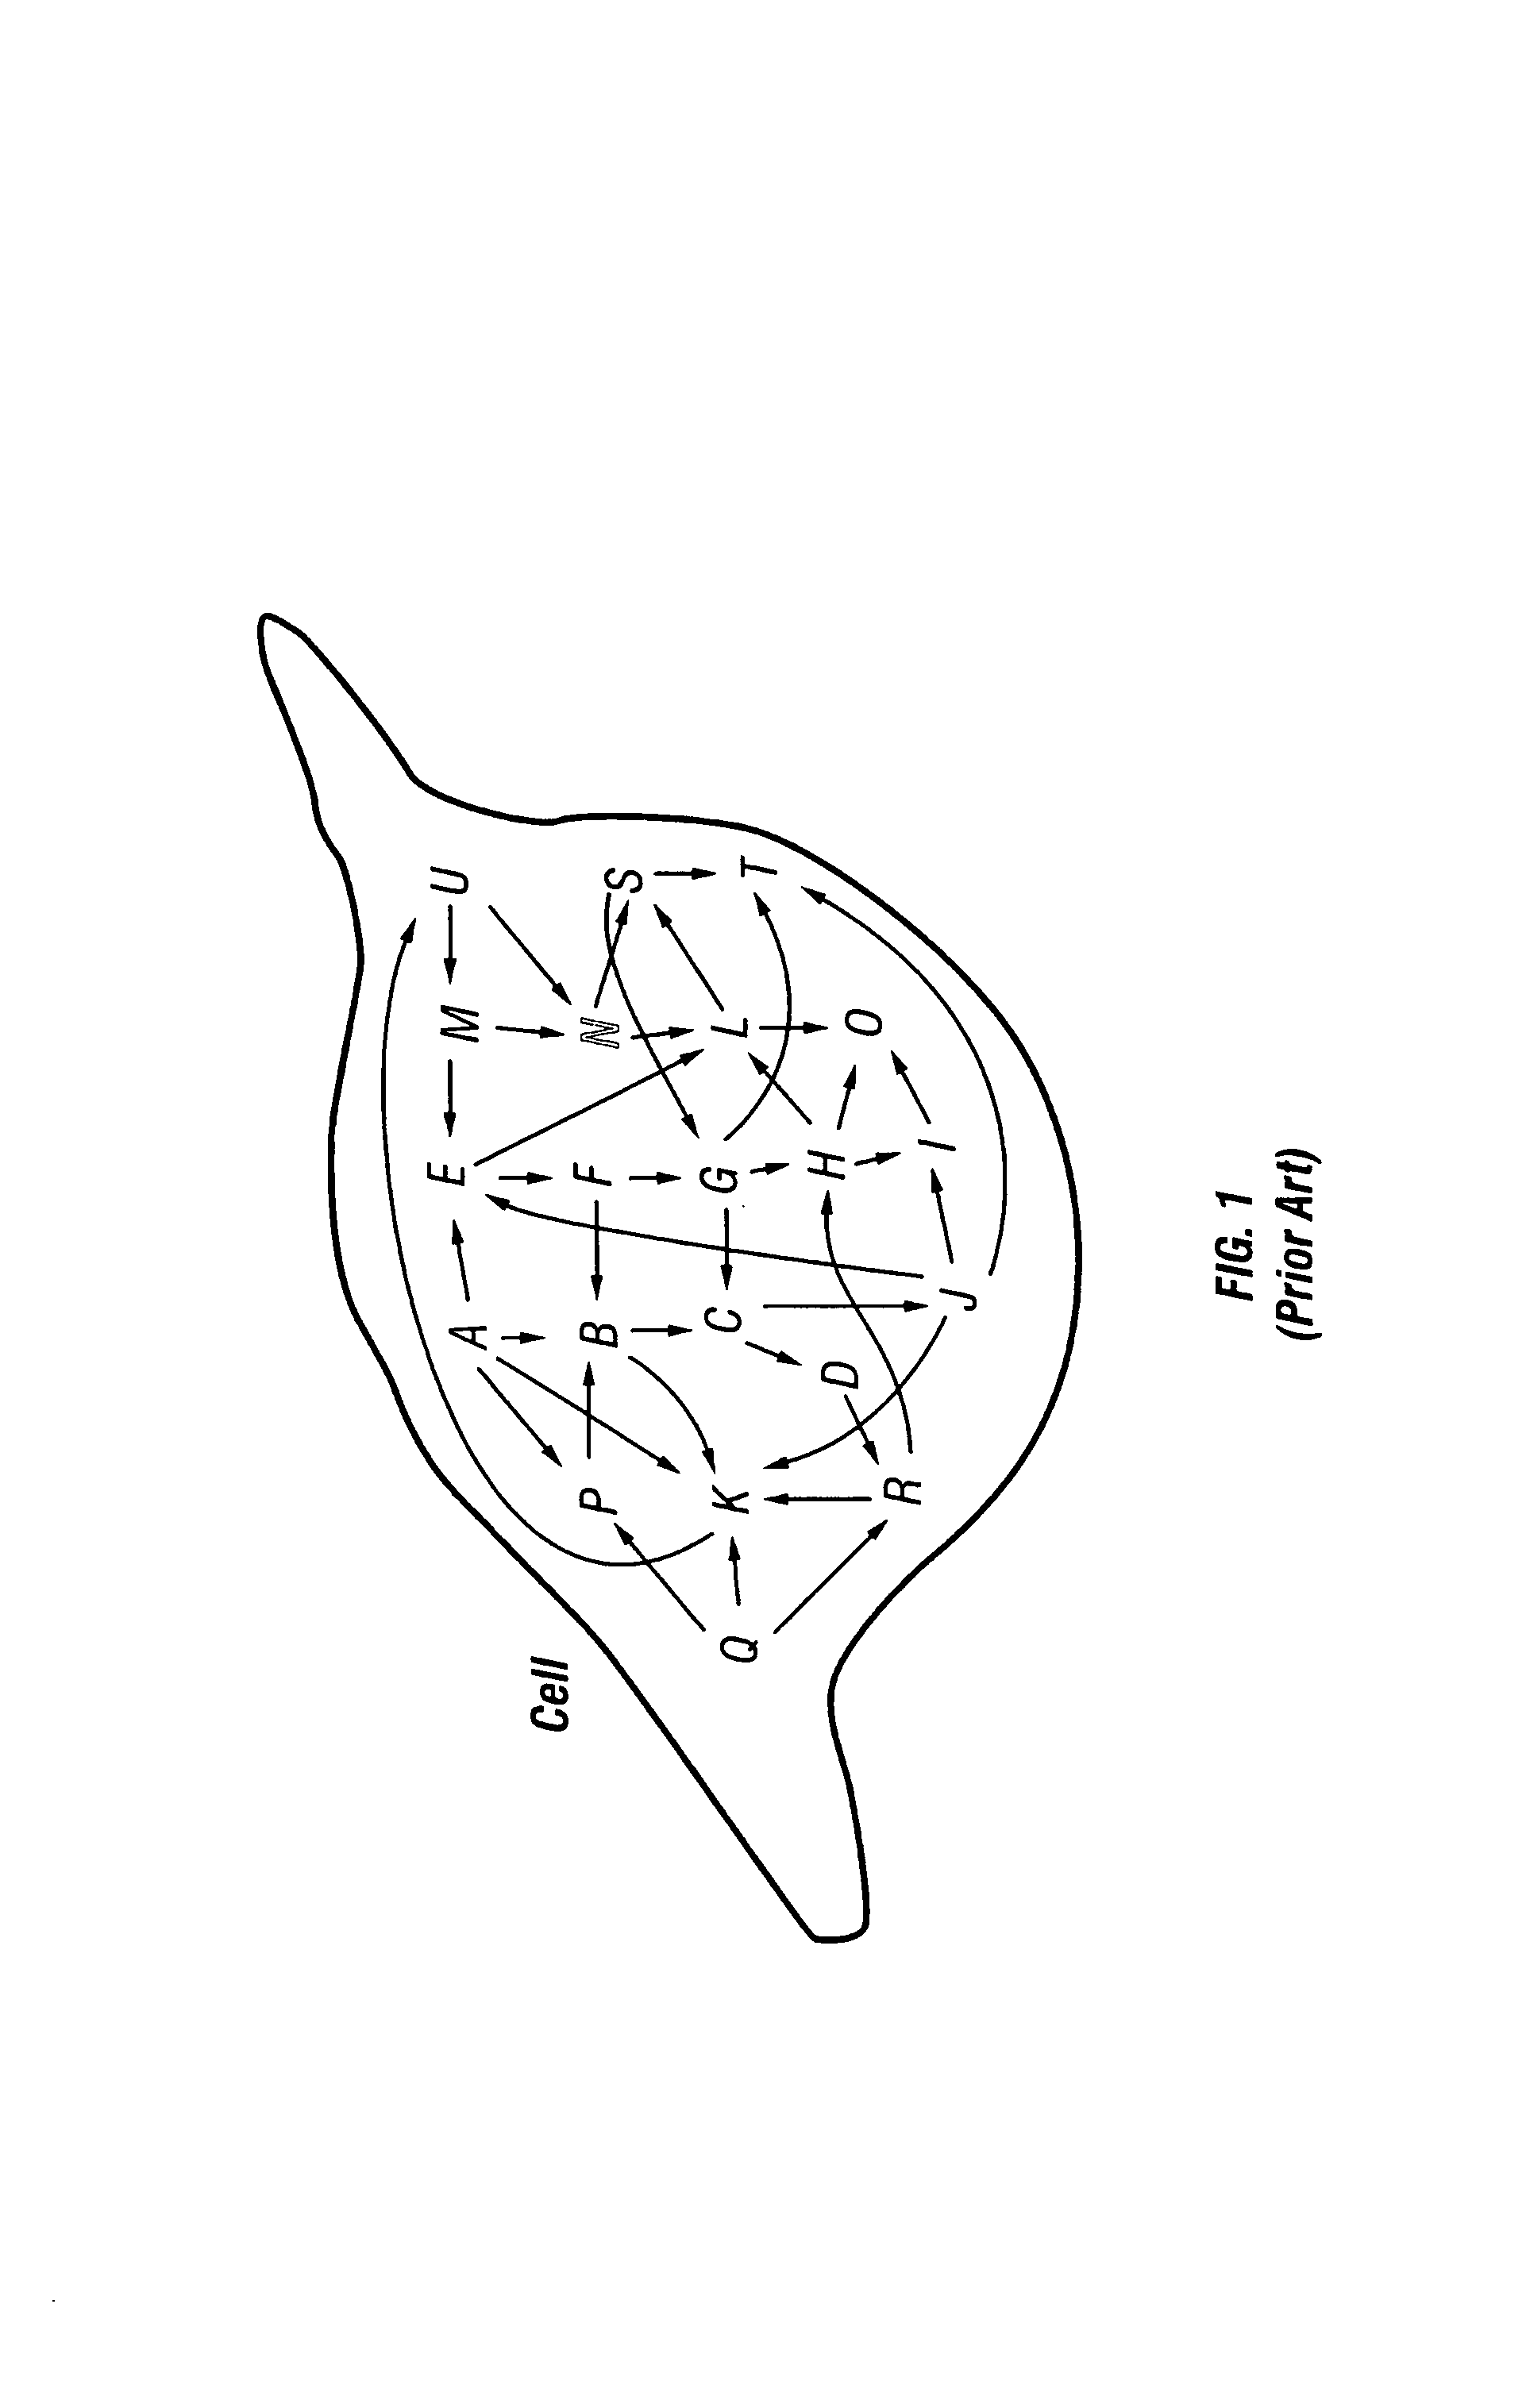 Method to measure the activation state of signaling pathways in cells